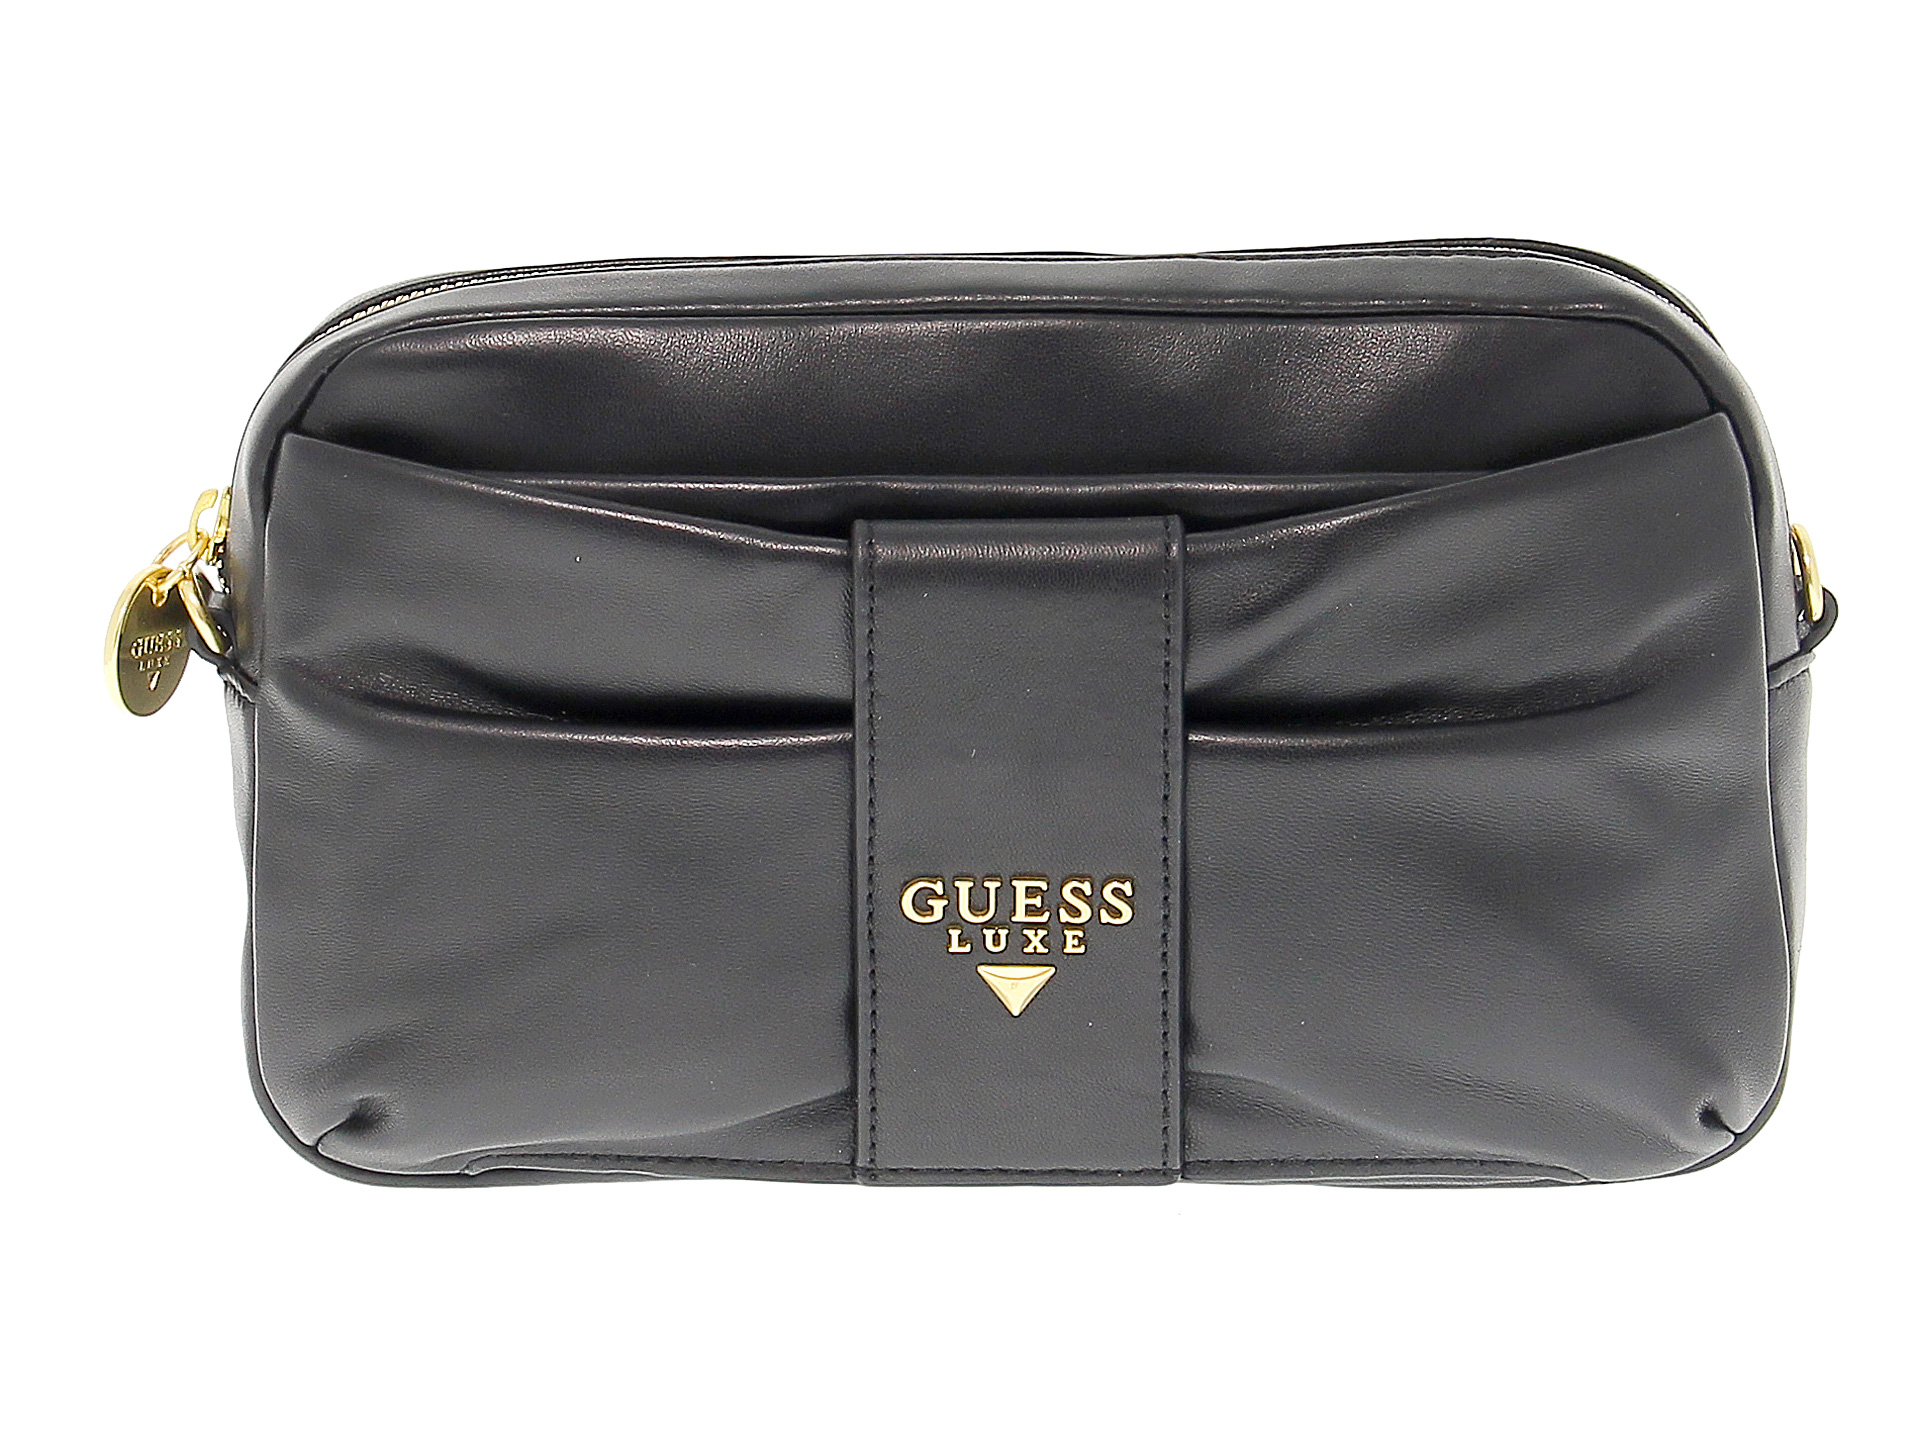 Guess Luxe Crossbody New real leather black shoulder Bag Women